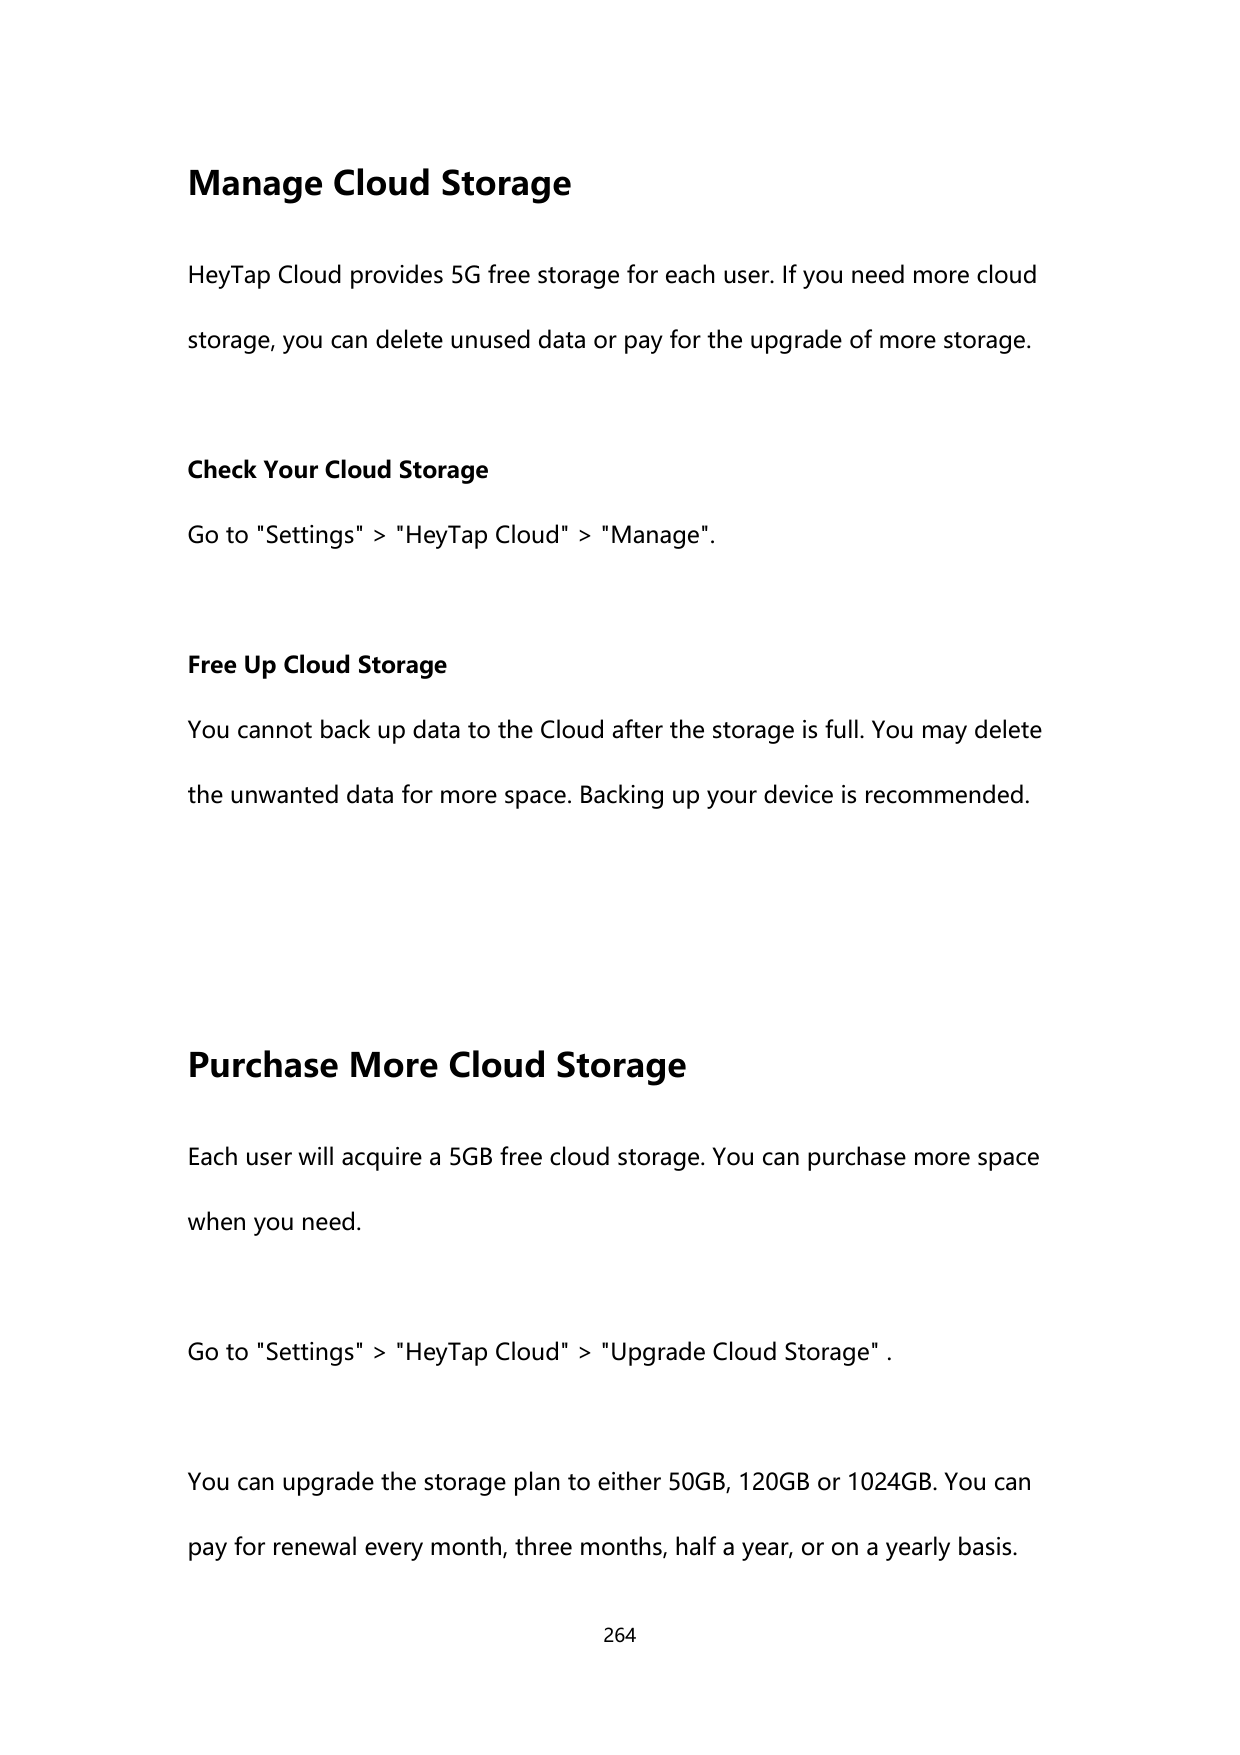 Manage Cloud StorageHeyTap Cloud provides 5G free storage for each user. If you need more cloudstorage, you can delete unused da